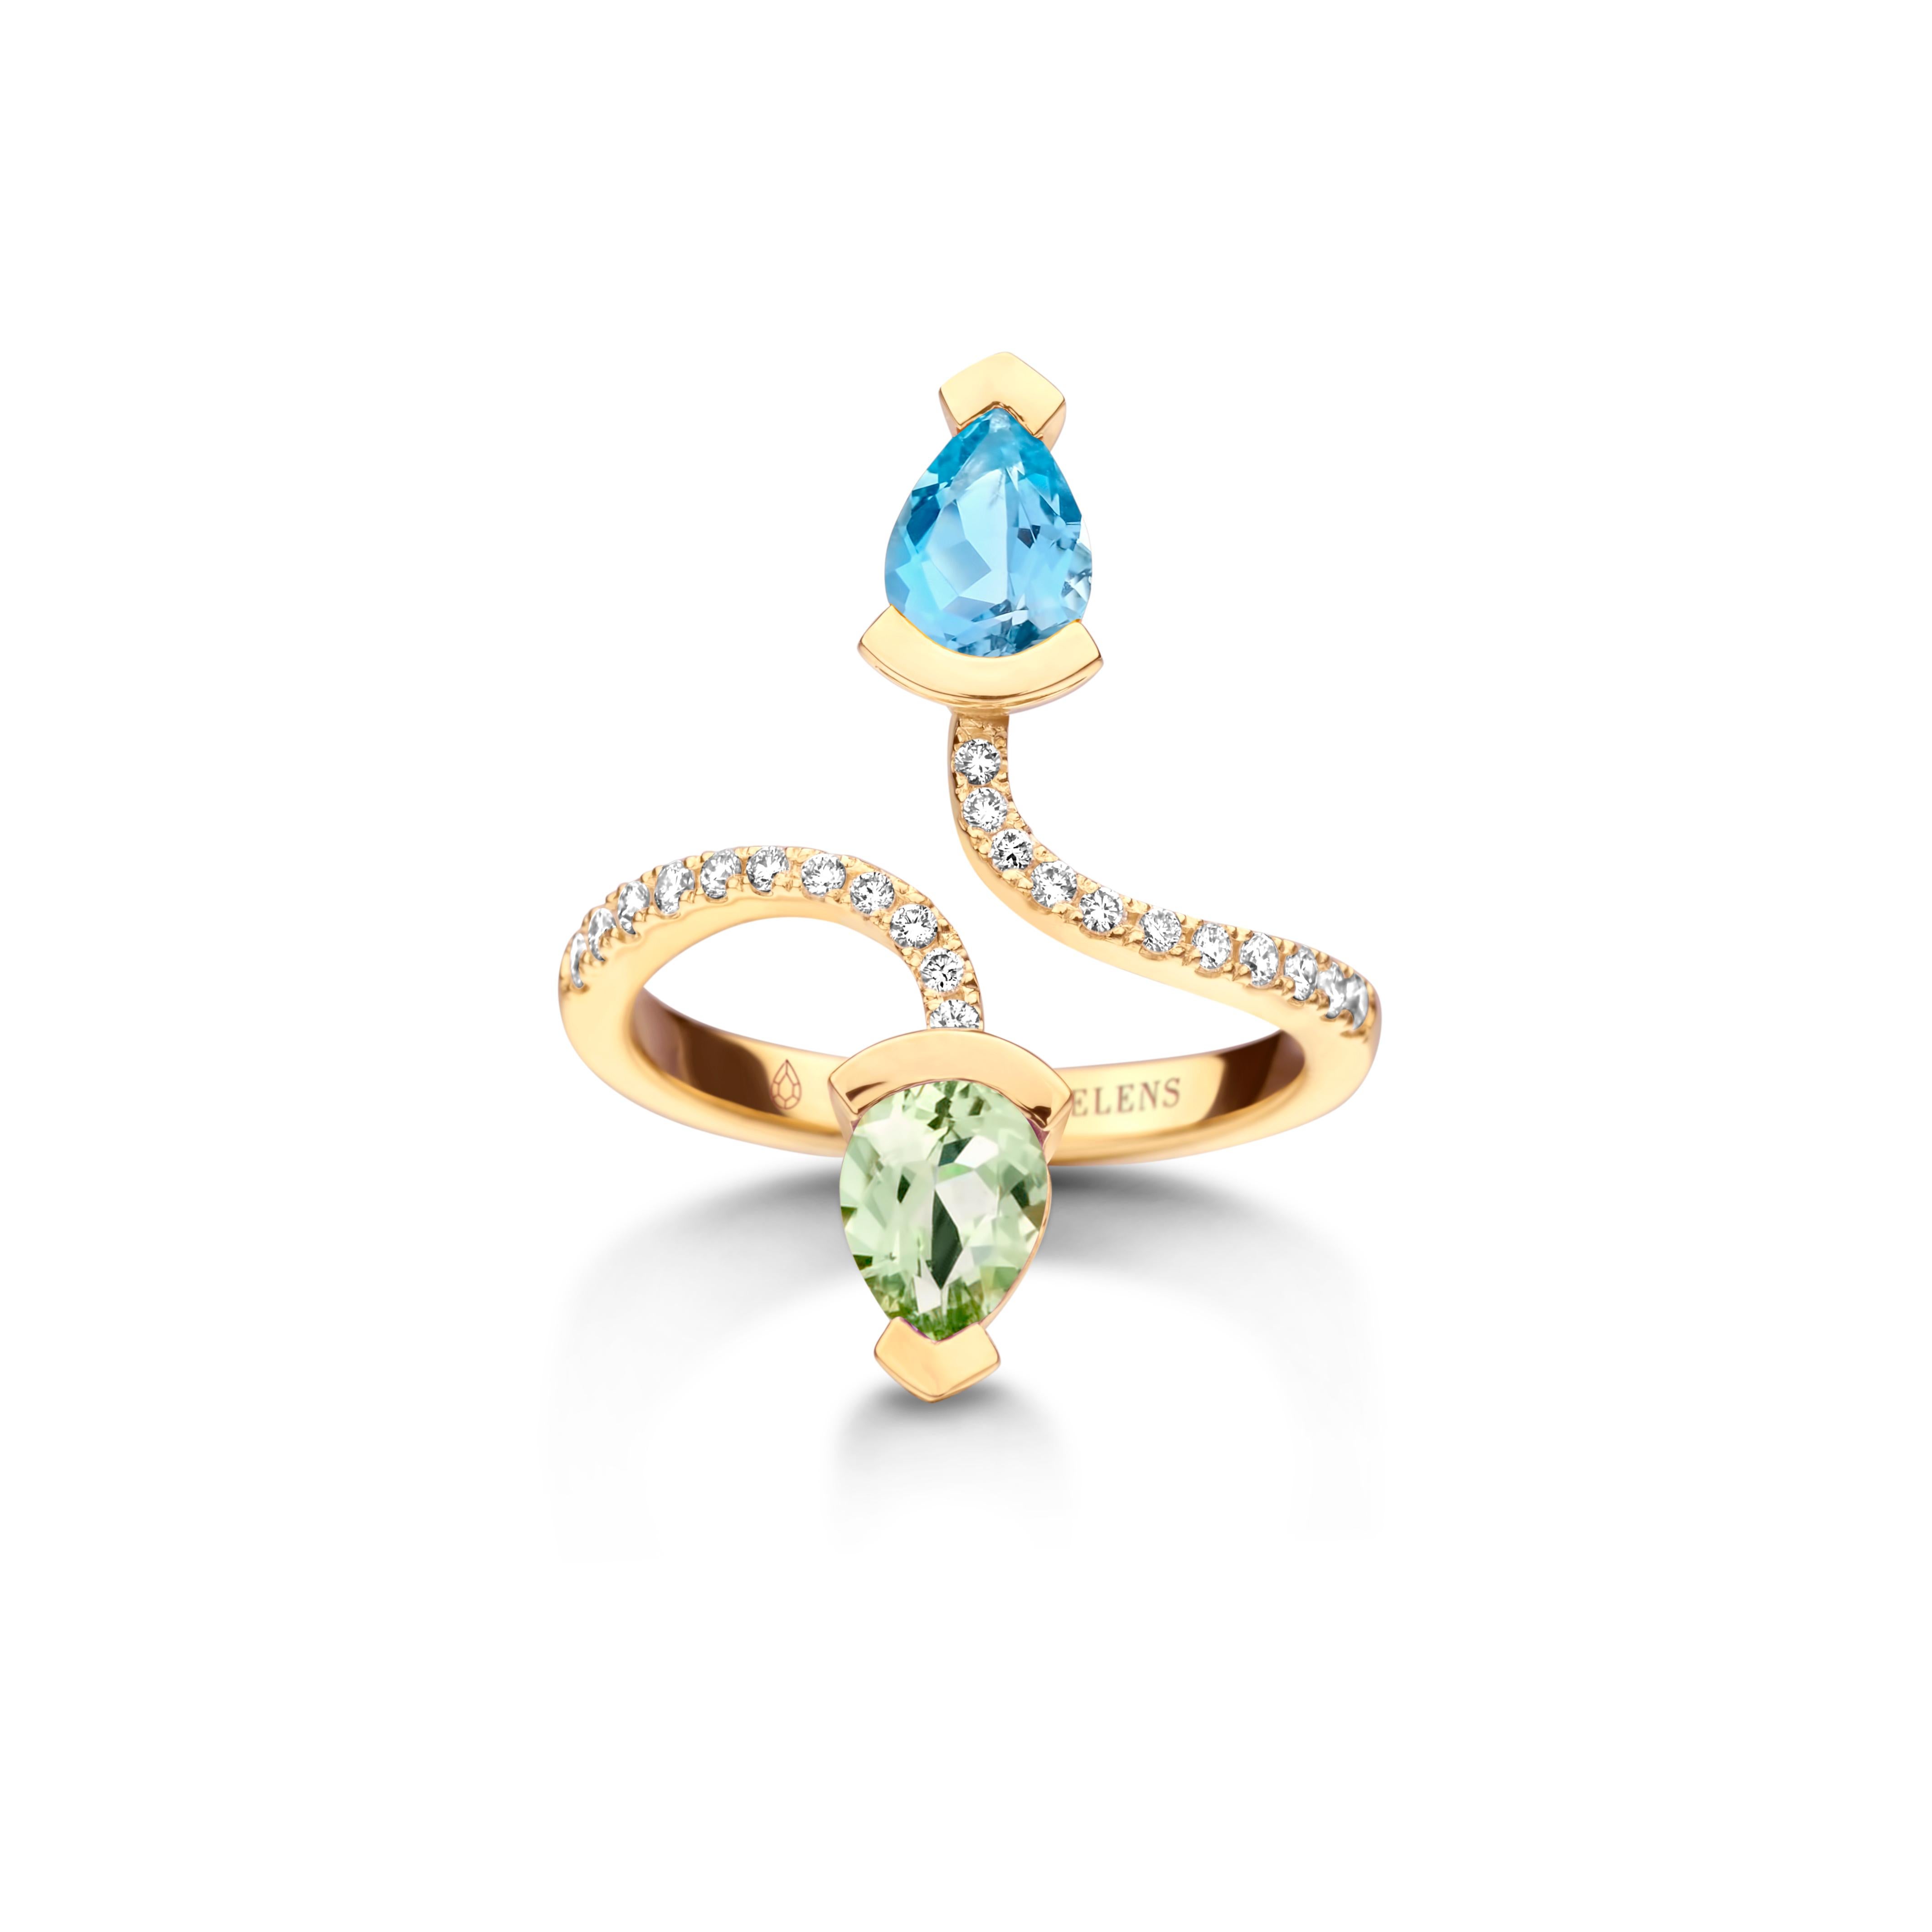 Adeline Duo ring in 18Kt white gold 5g set with a pear-shaped aquamarine 0,70 Ct, a pear-shaped green beryl 0,70 Ct and 0,19 Ct of white brilliant cut diamonds - VS F quality. Celine Roelens, a goldsmith and gemologist, is specialized in unique,